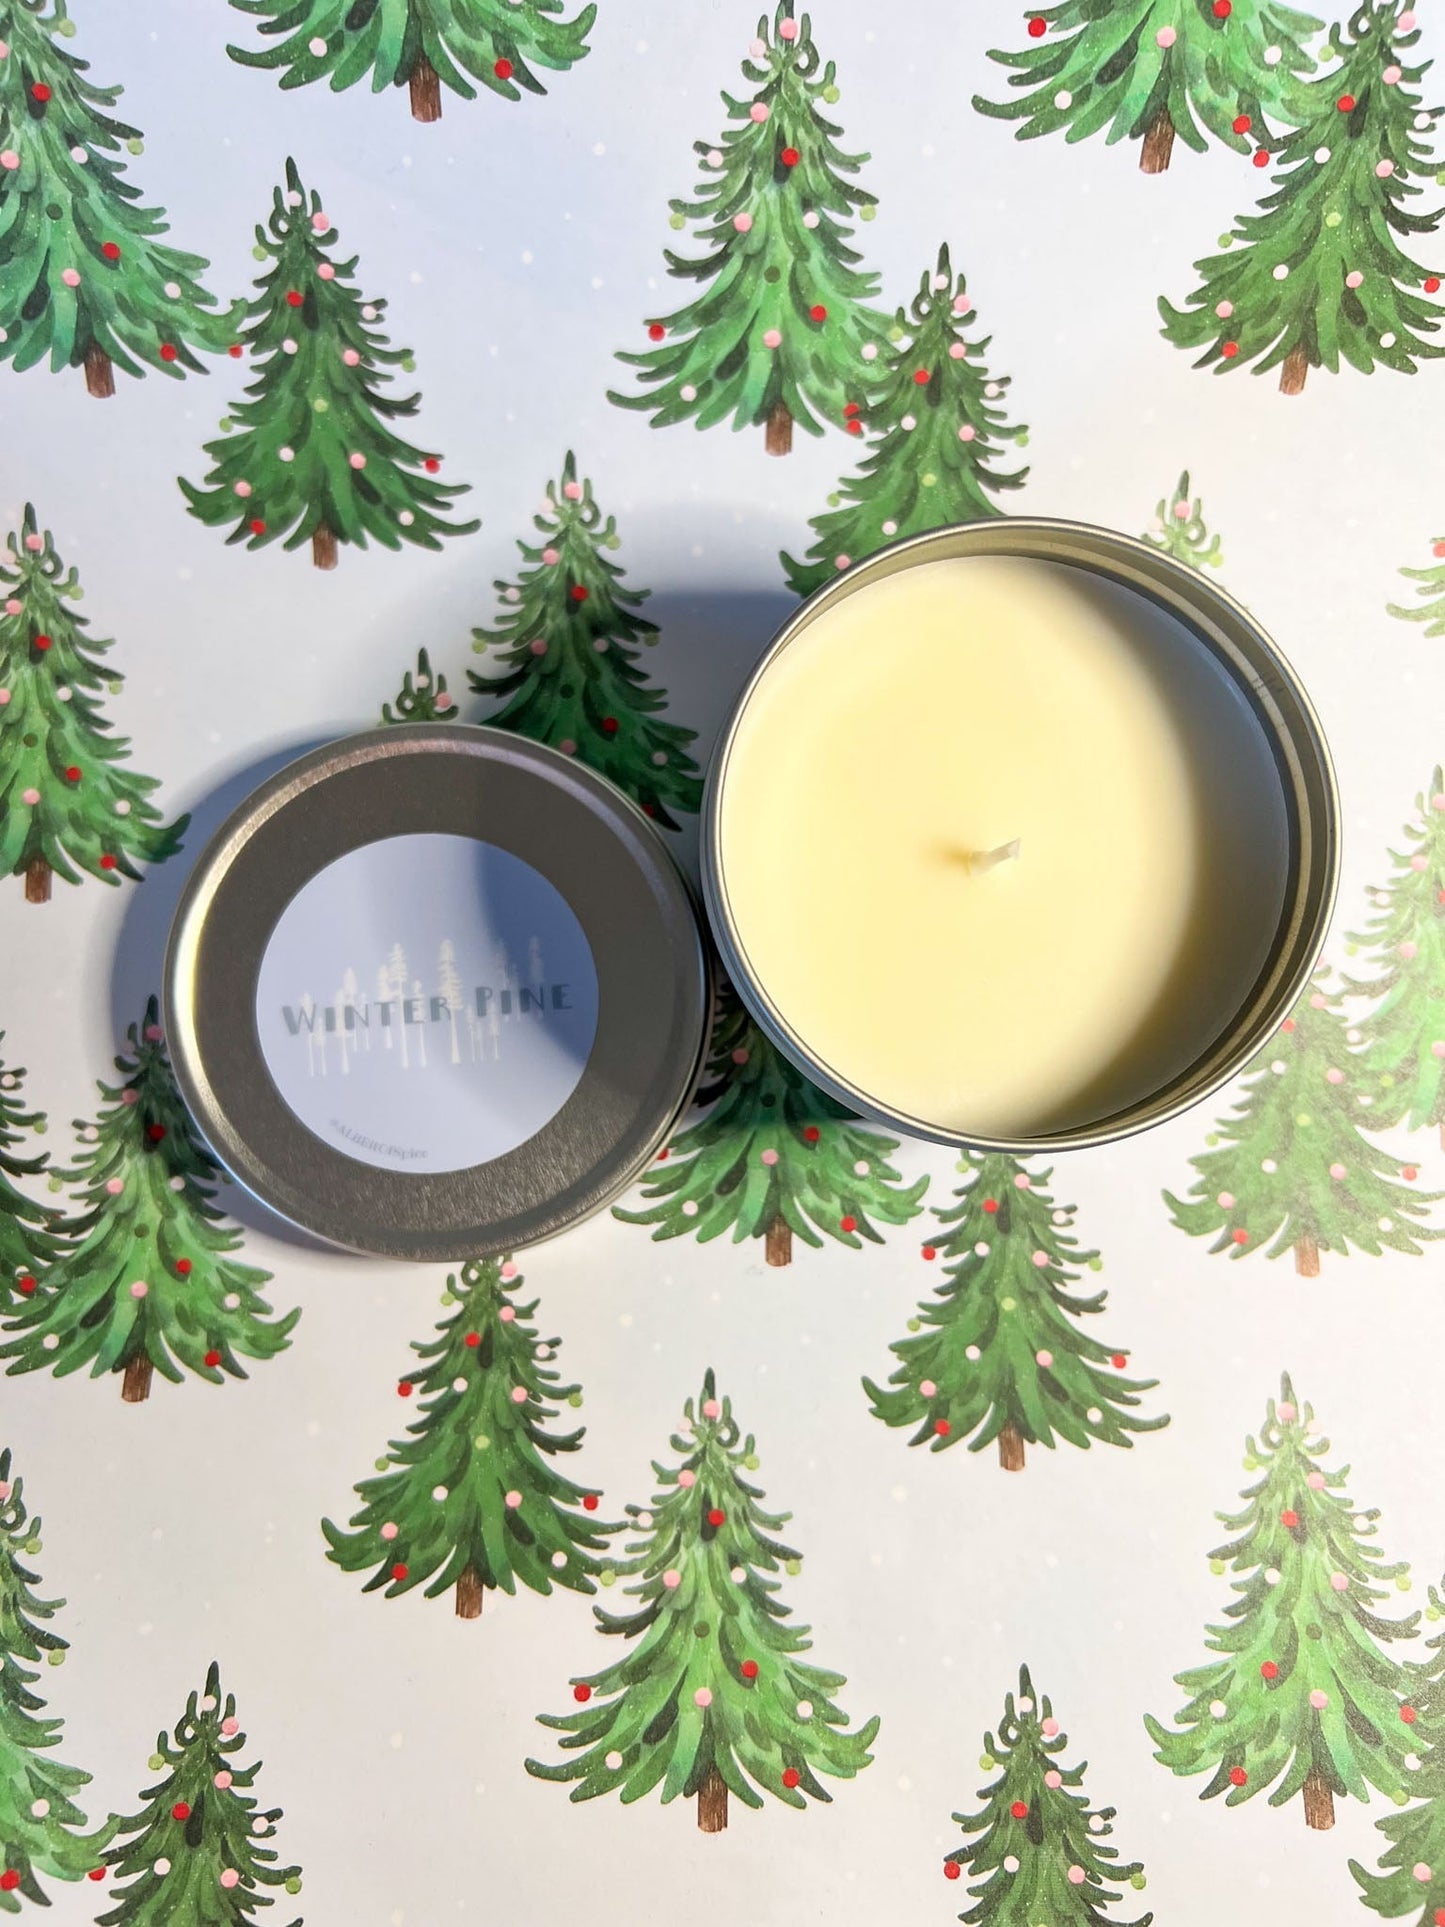 Winter Pine Candle Soy Wax